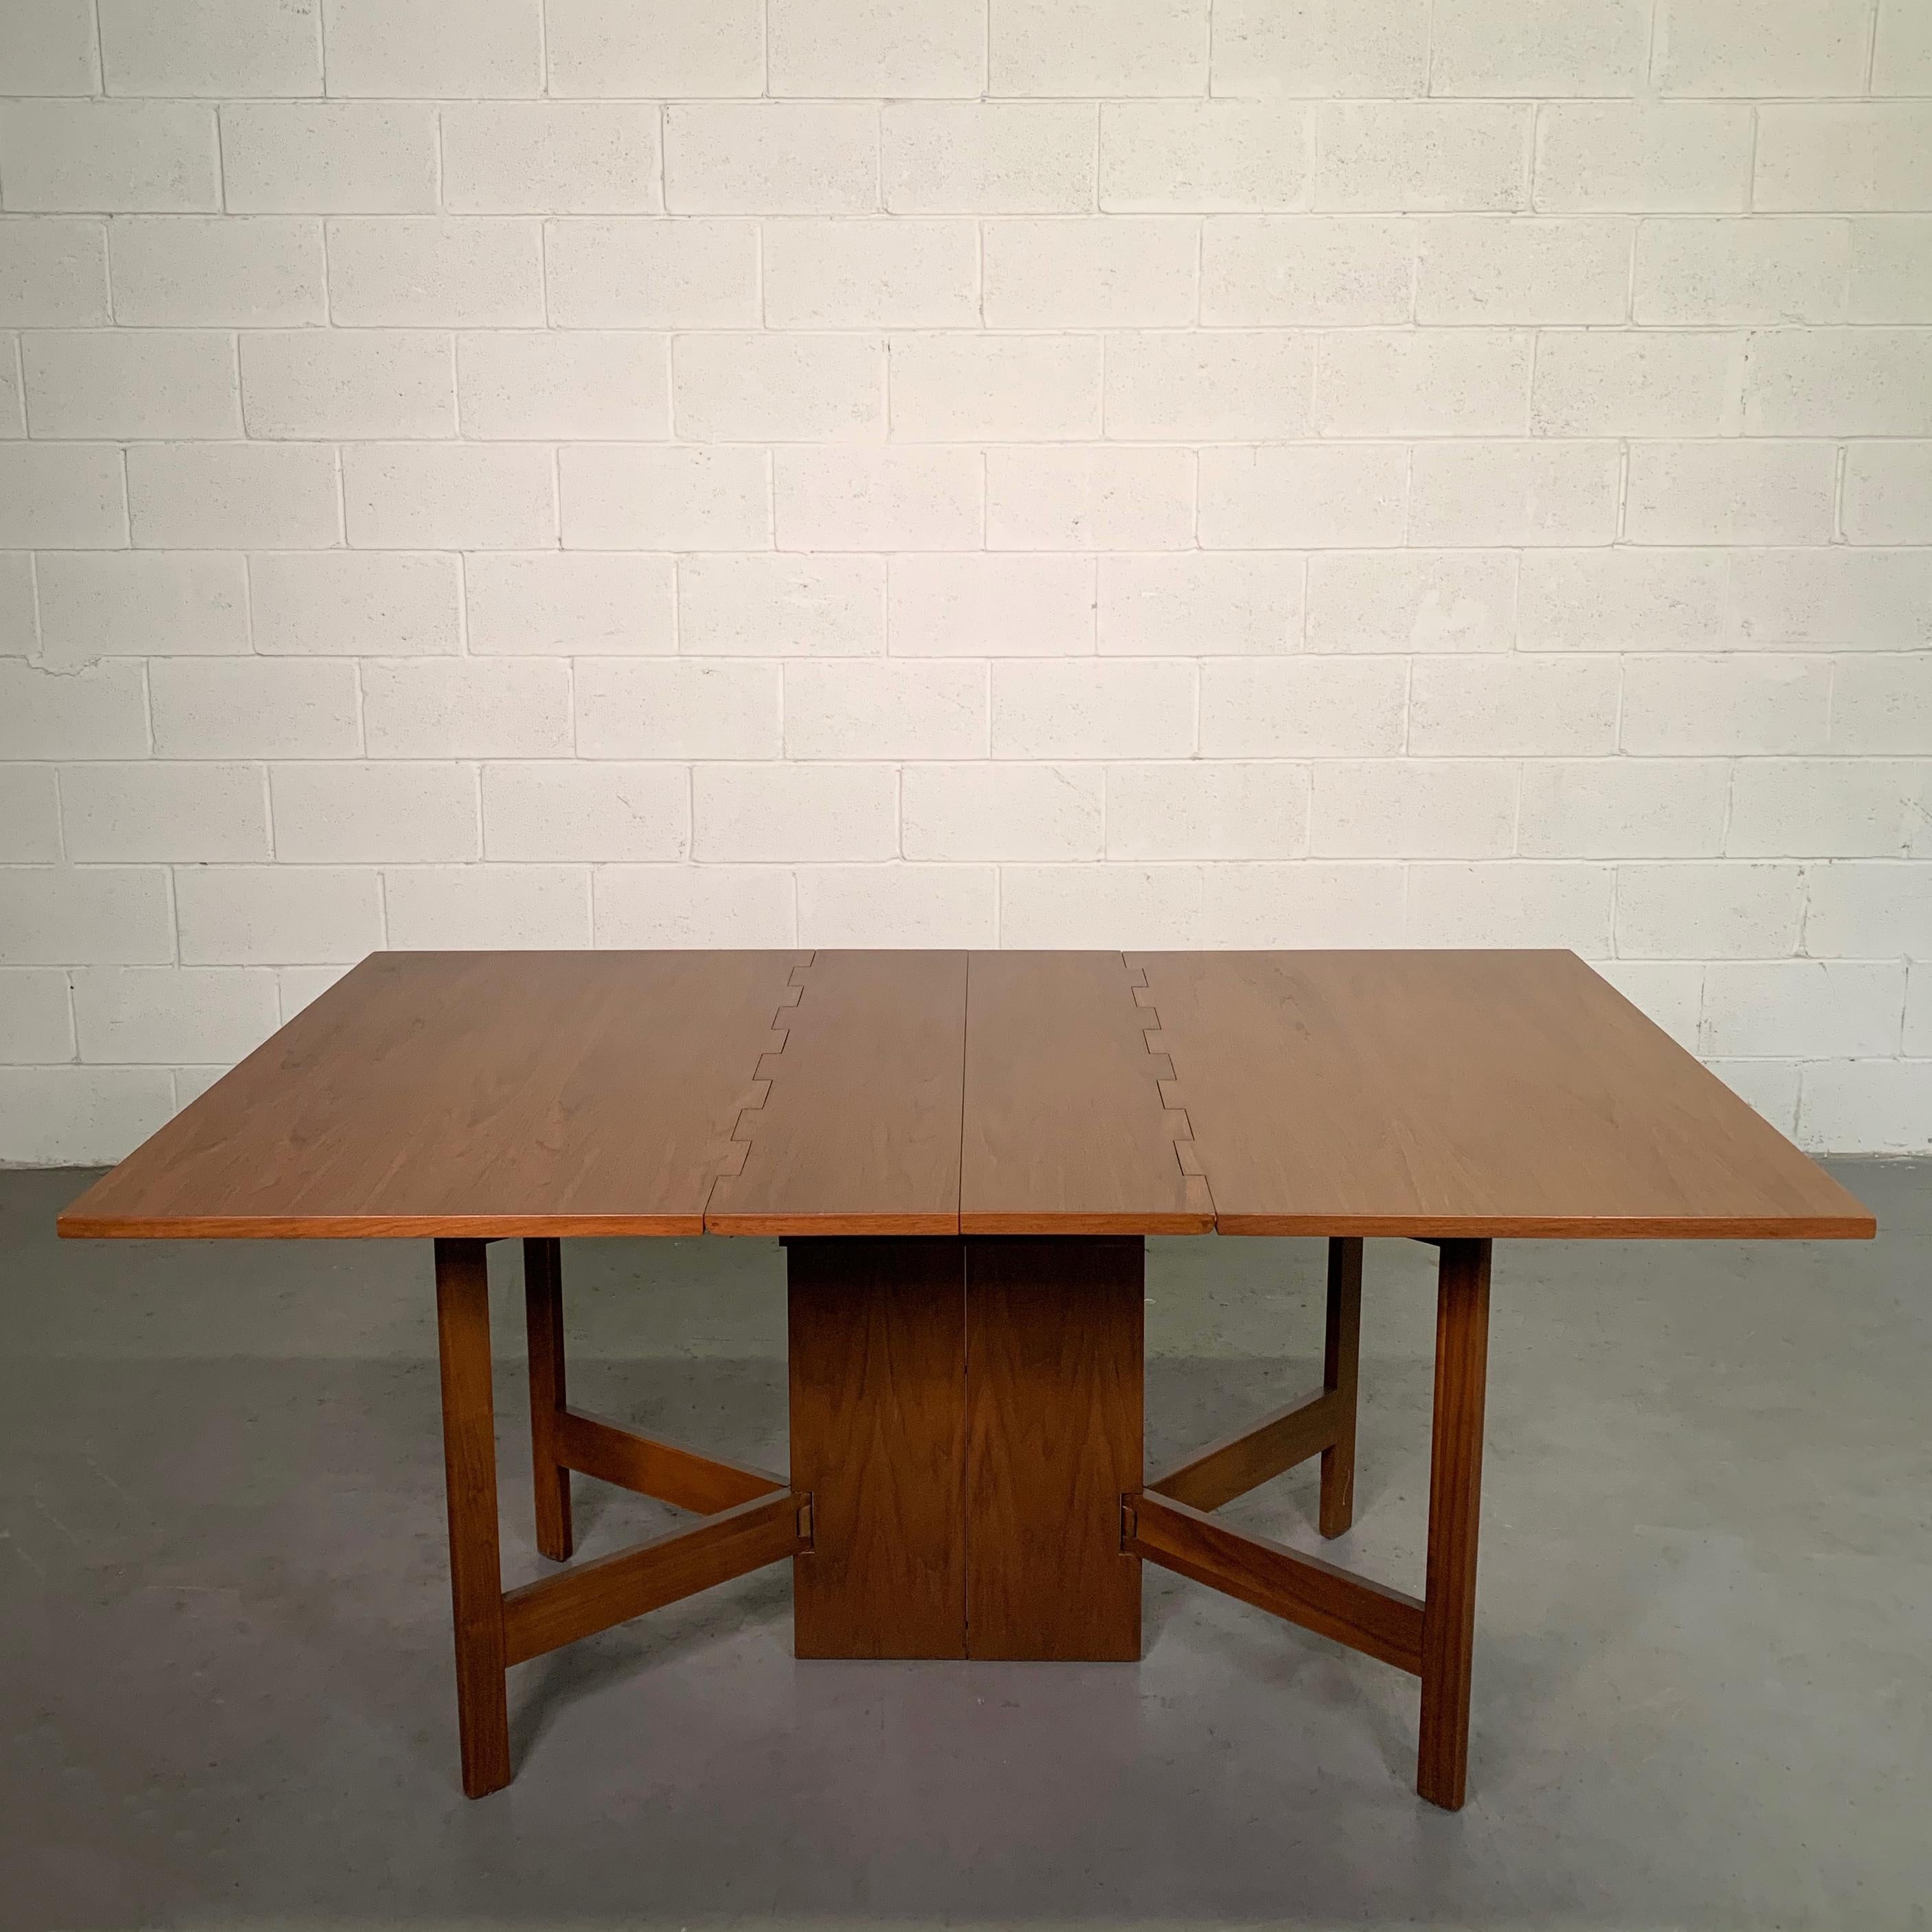 Mid-Century Modern, walnut dining table by George Nelson for Herman Miller features drop leaf, gate fold legs that bring the table to 18.5 inches when both folded.